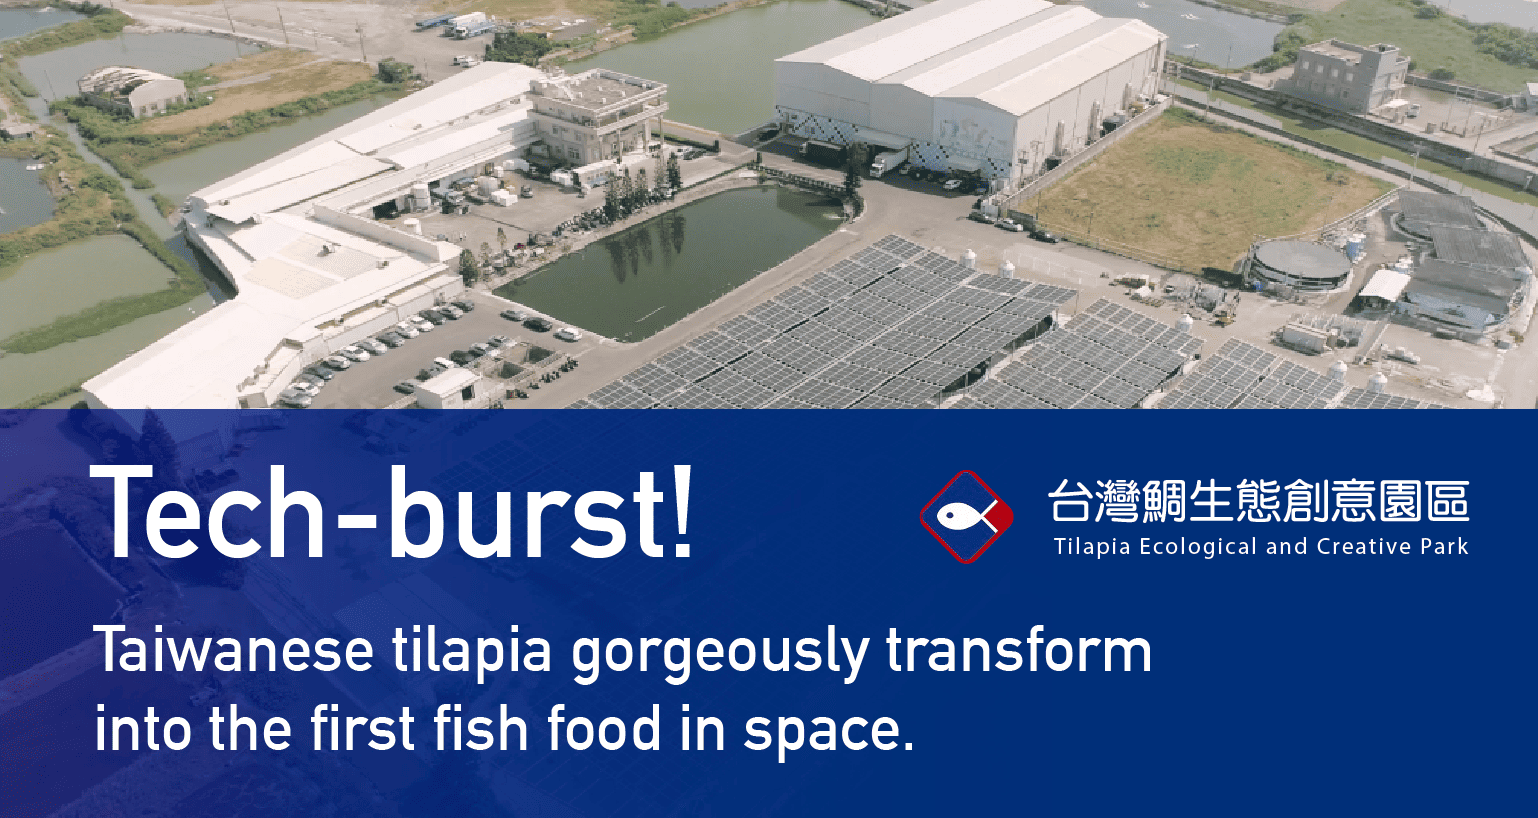 Tech-burst! Taiwanese tilapia gorgeously transform into the first fish food in space.